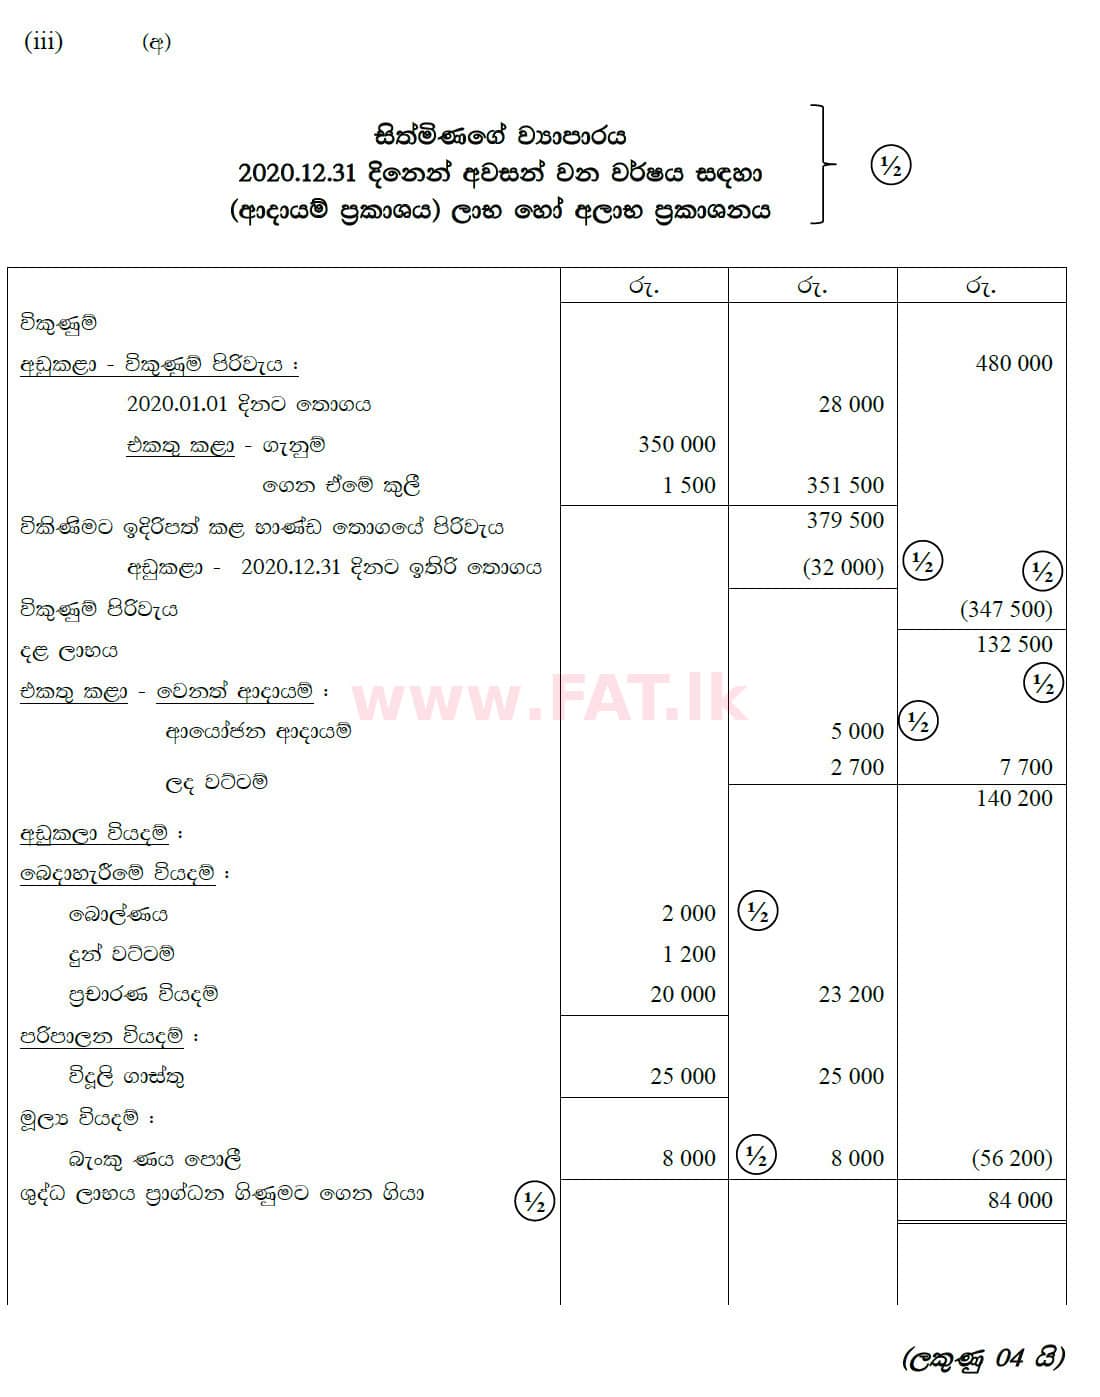 National Syllabus : Ordinary Level (O/L) Business and Accounting Studies - 2020 March - Paper II (සිංහල Medium) 7 5774